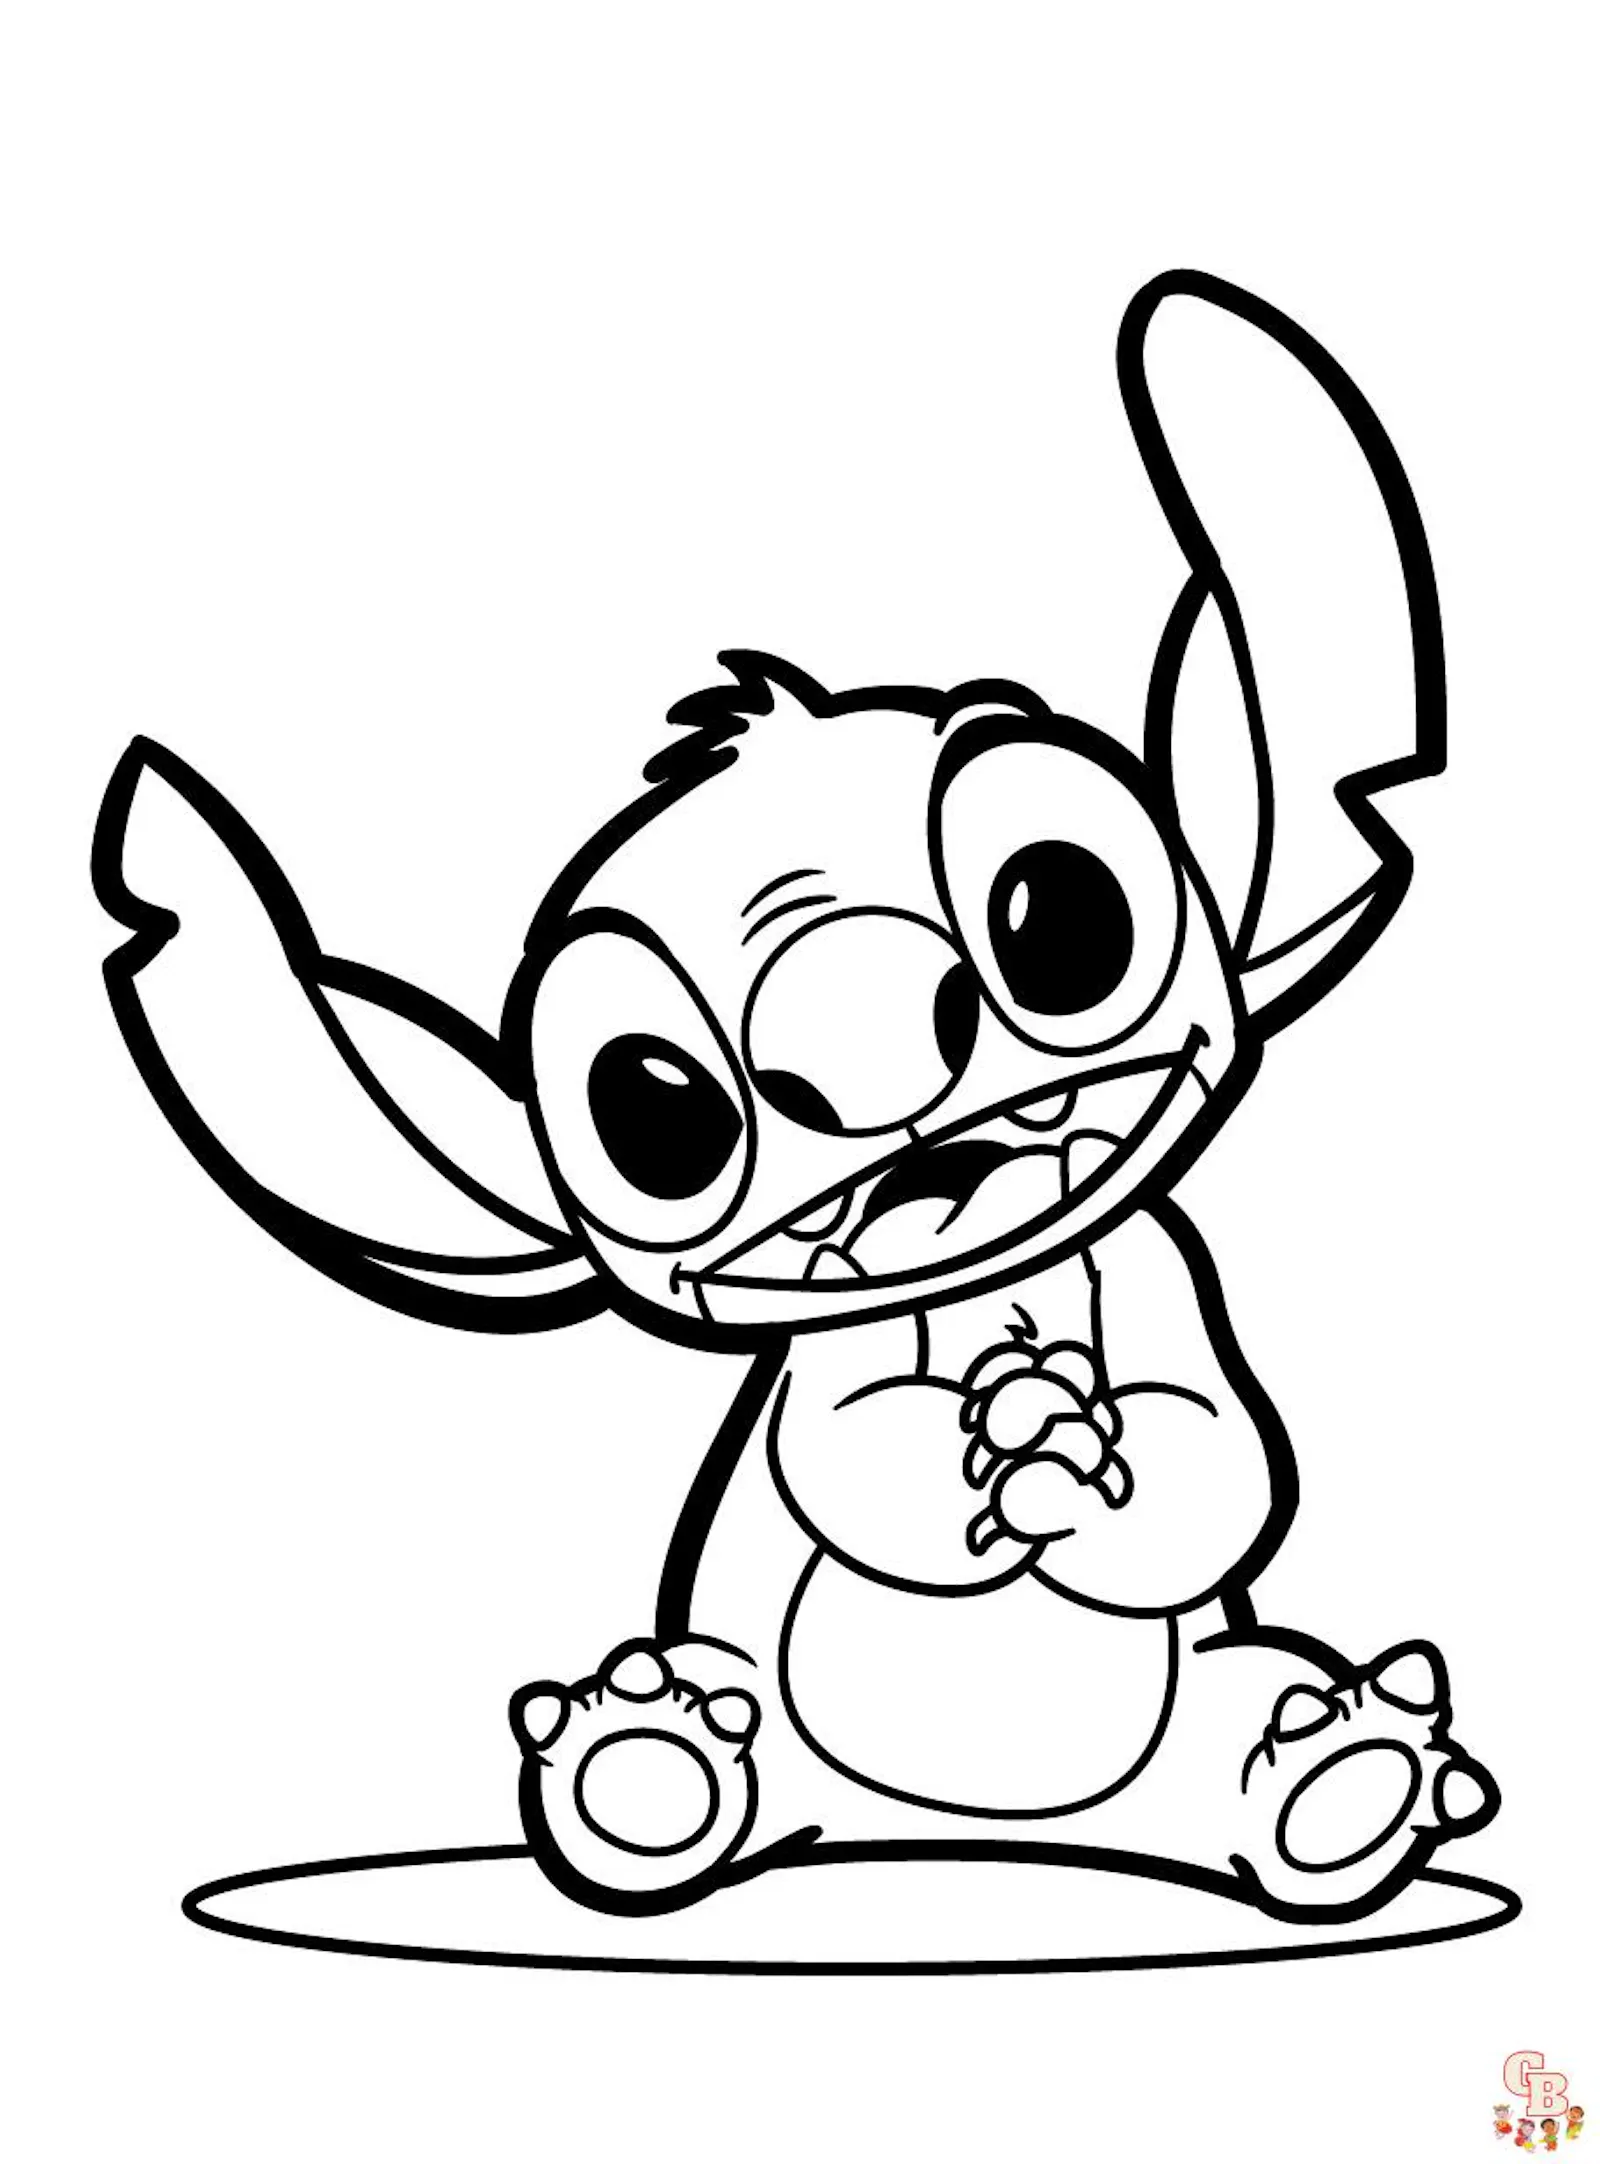 Stitch Coloring Pages: Free and Fun by gbcoloring on DeviantArt